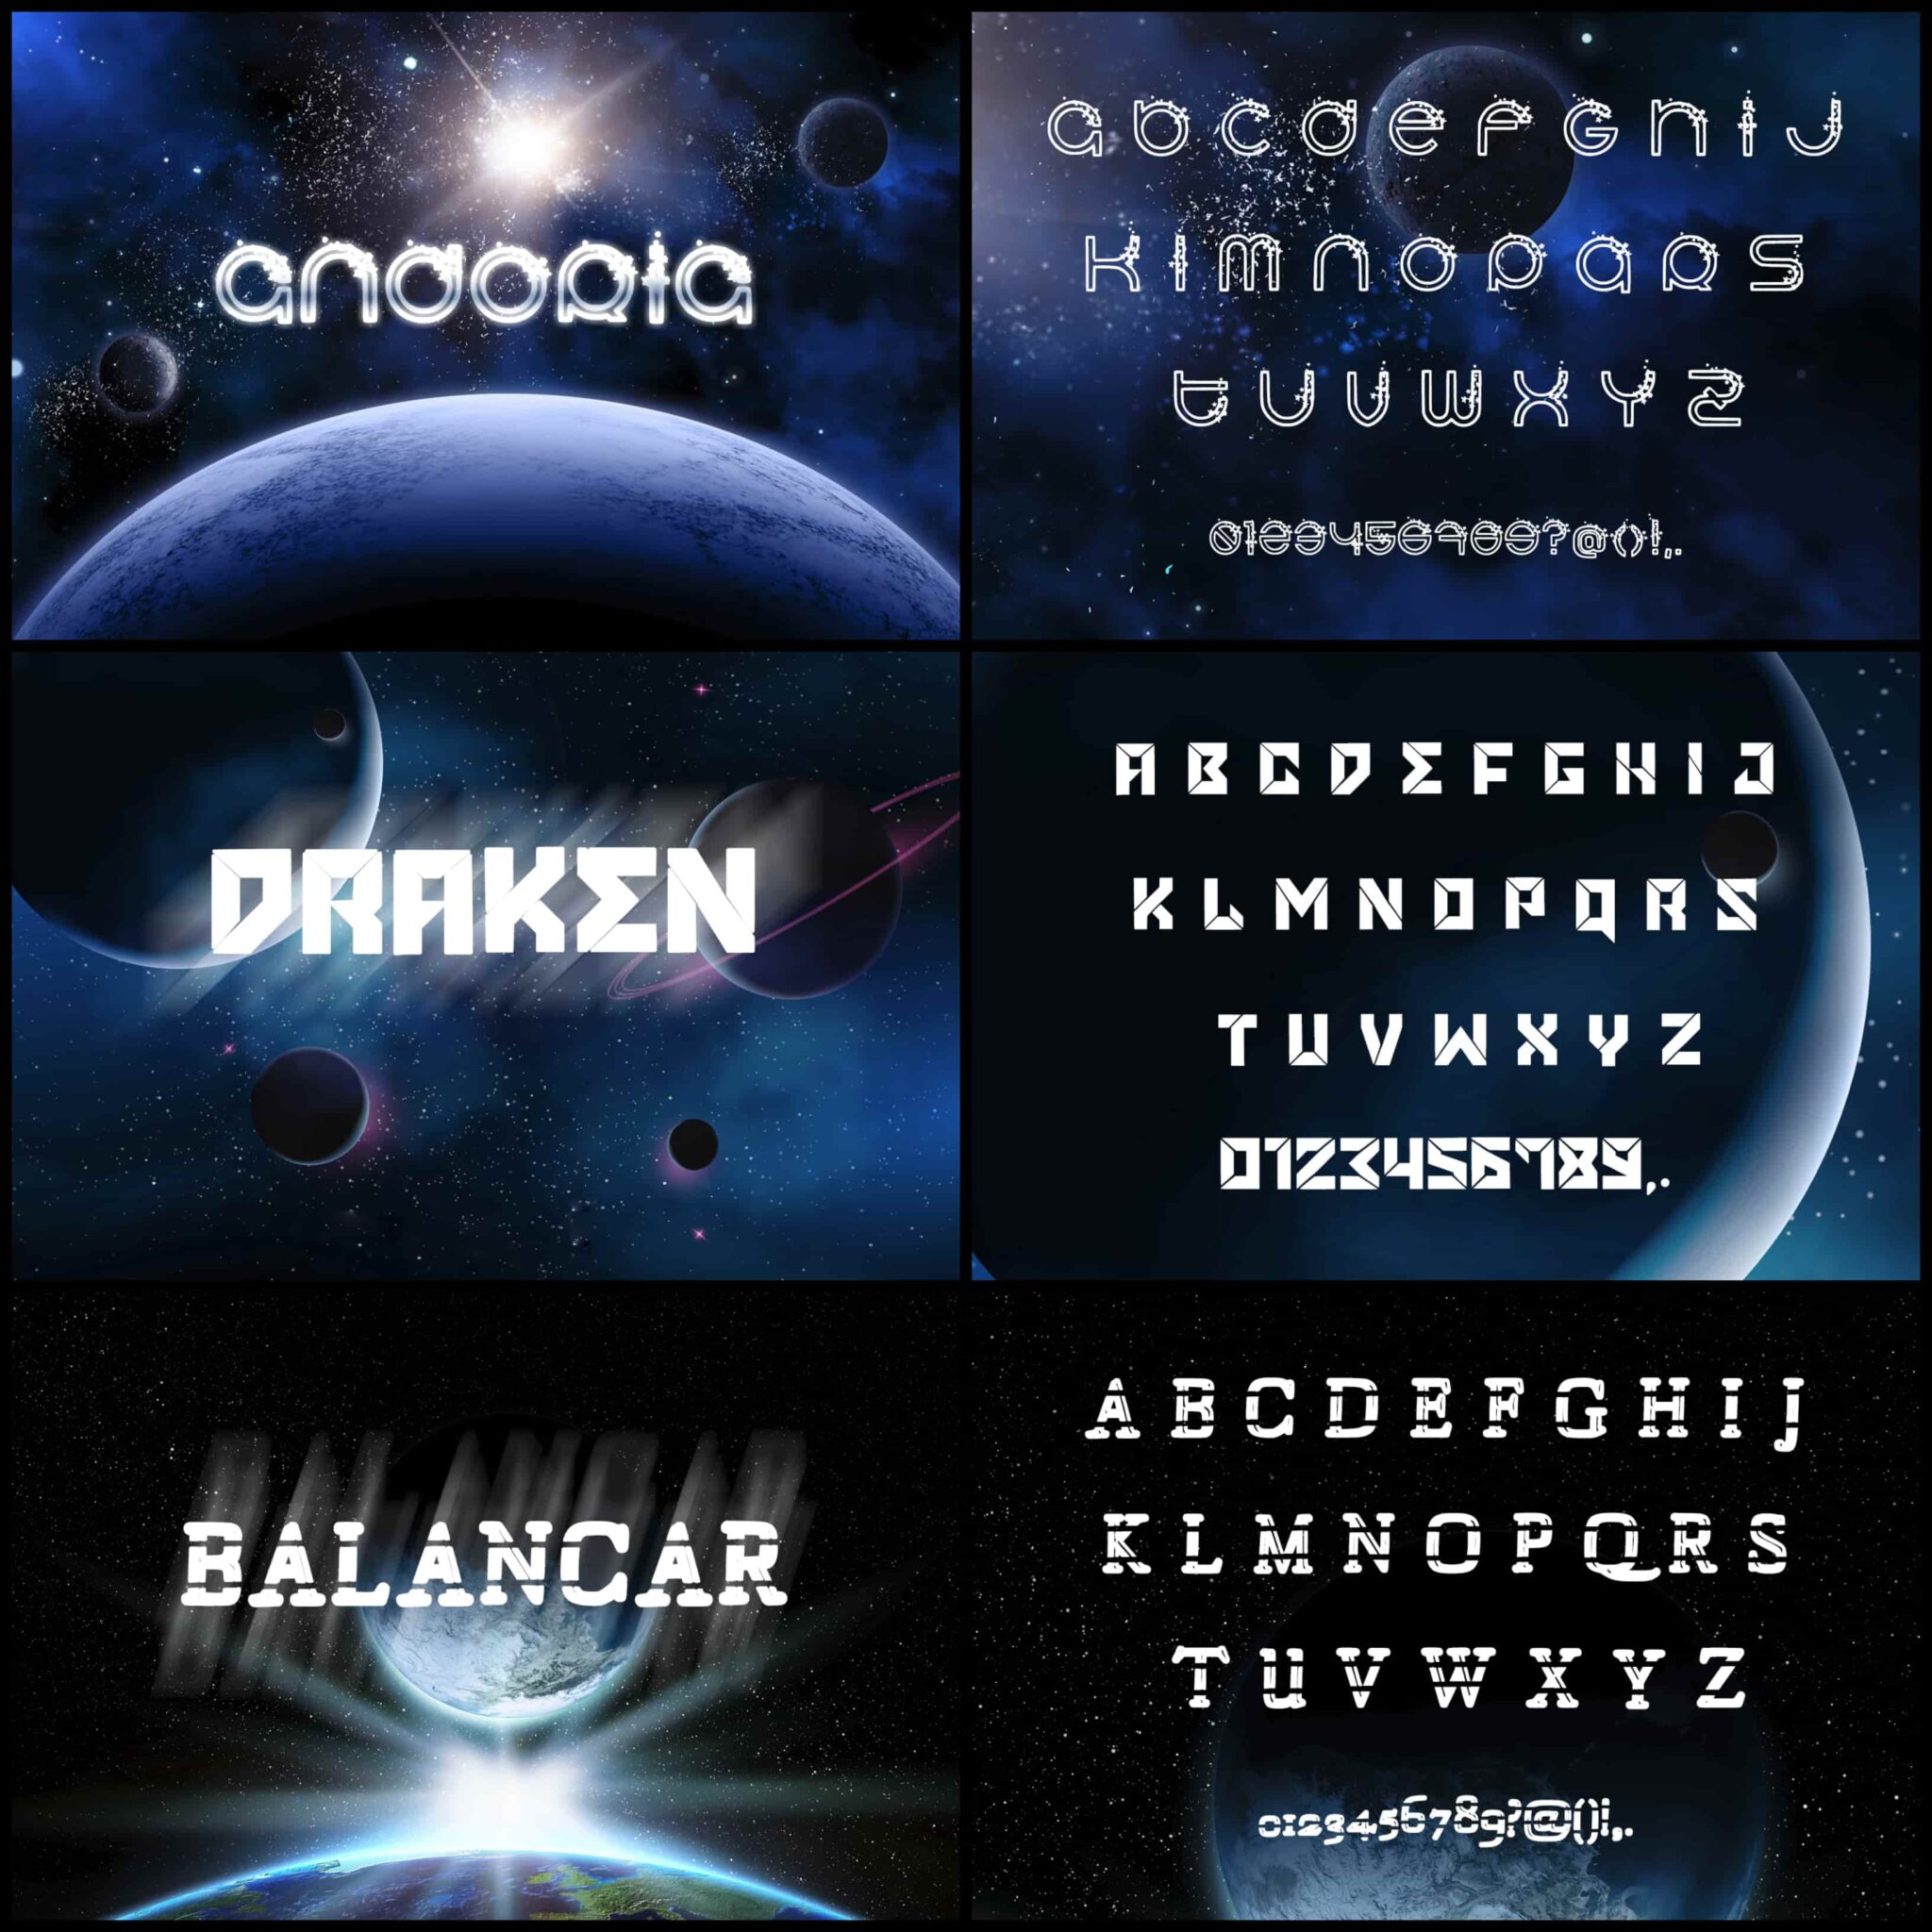 Some font options in light.